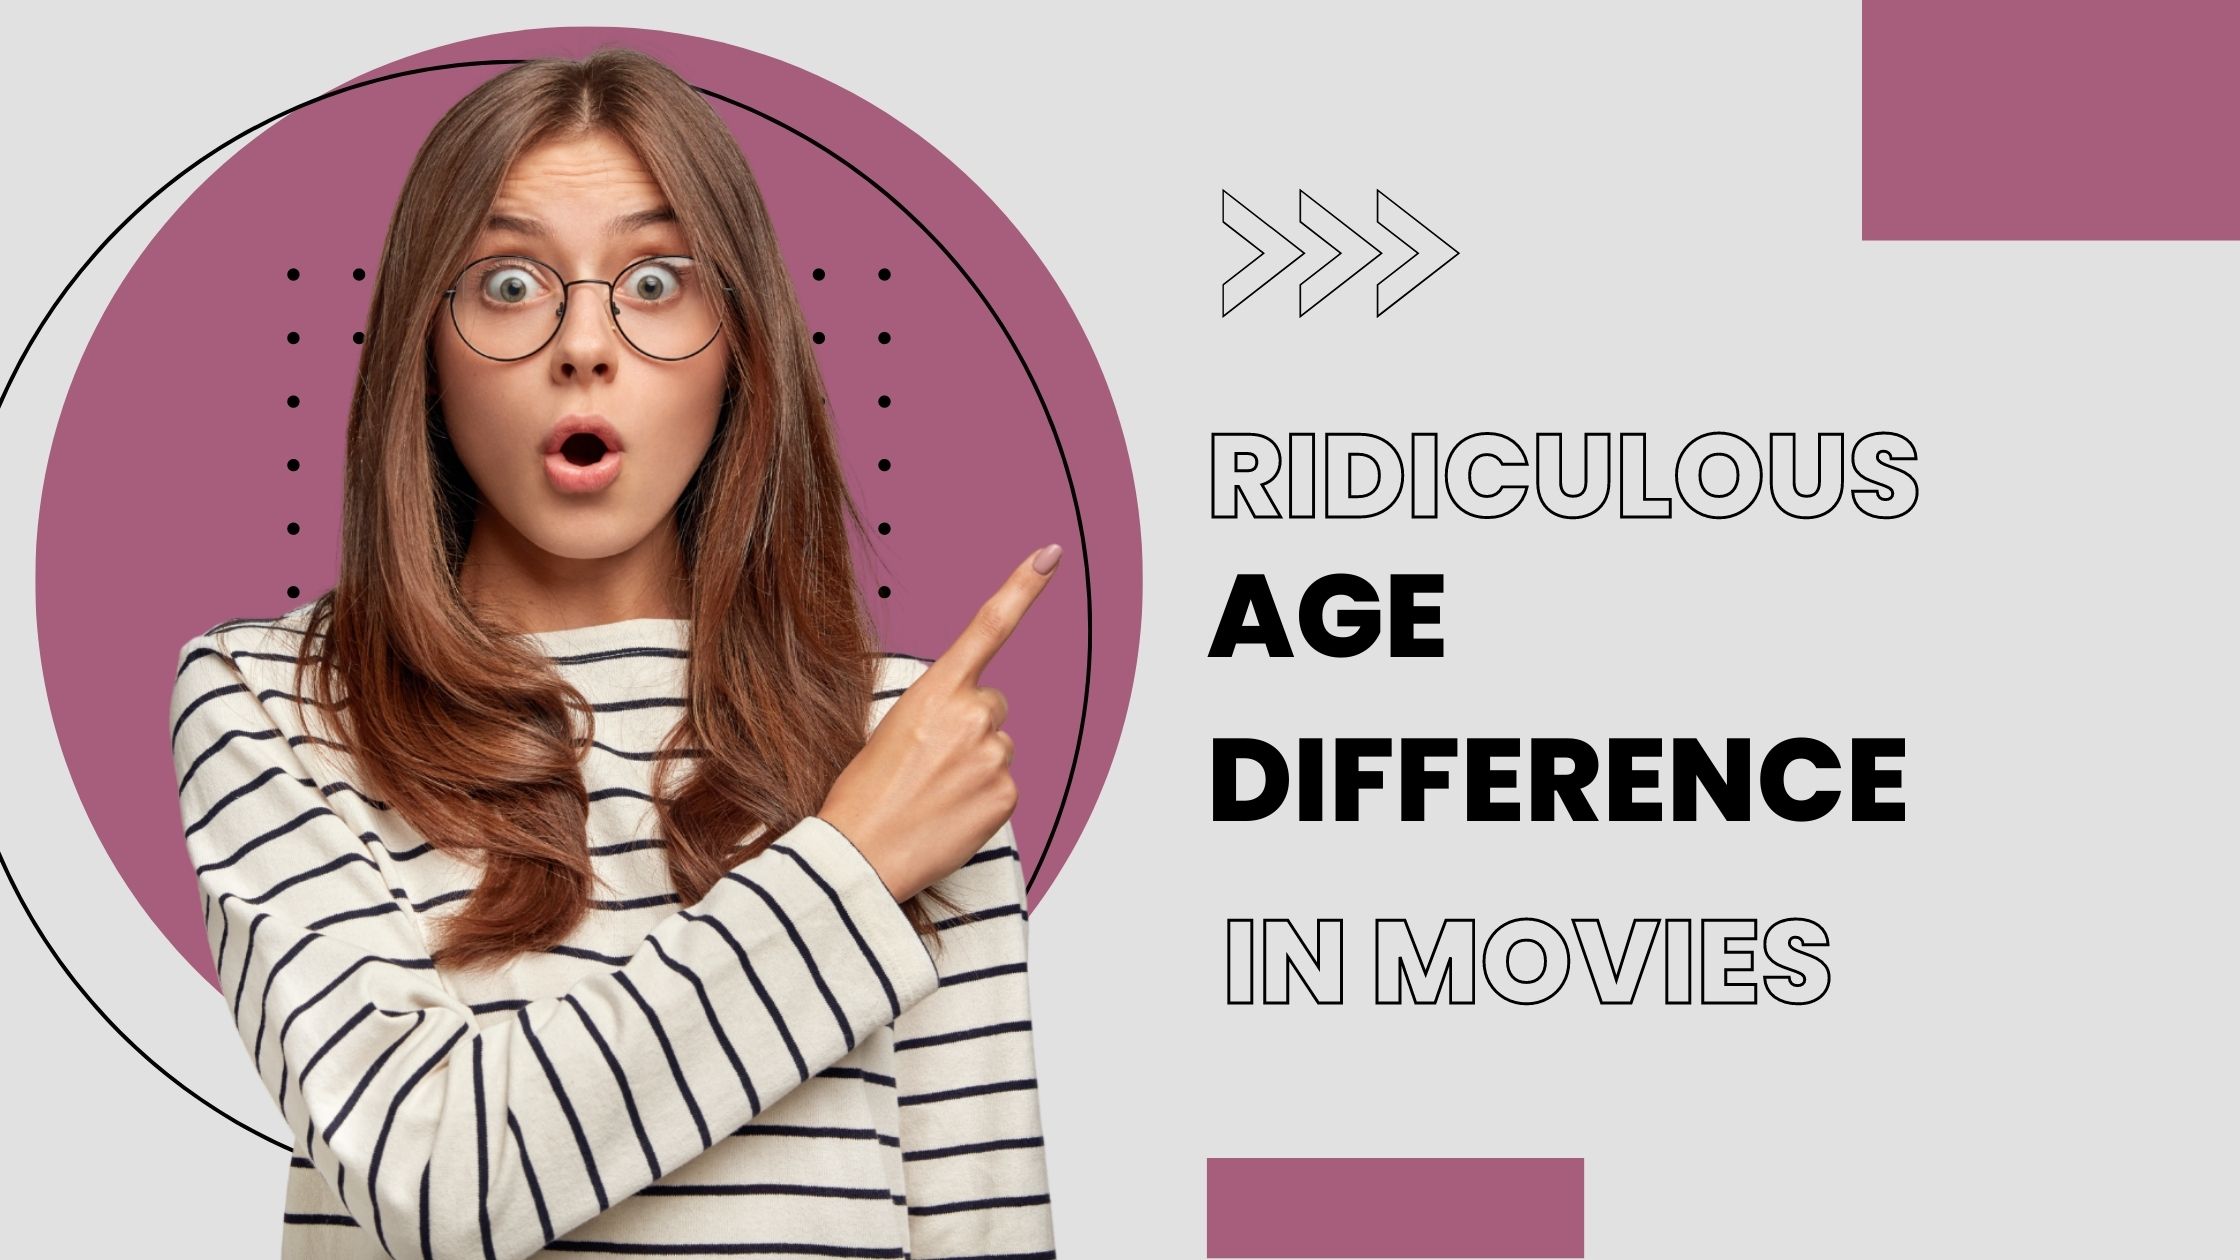 Ridiculous age differences in movies